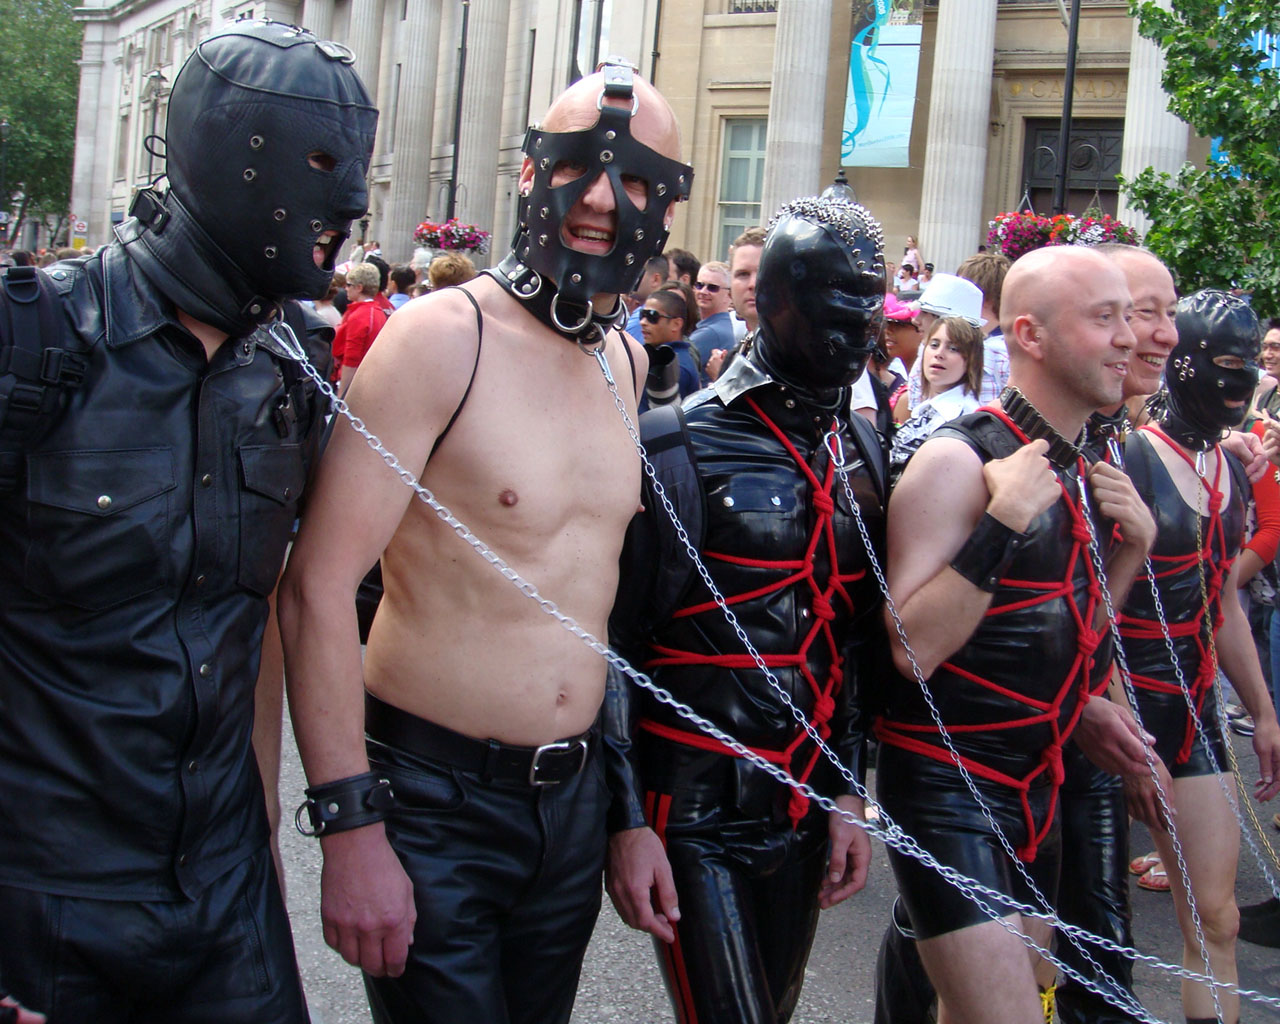 Pride flags for bdsm subcultures